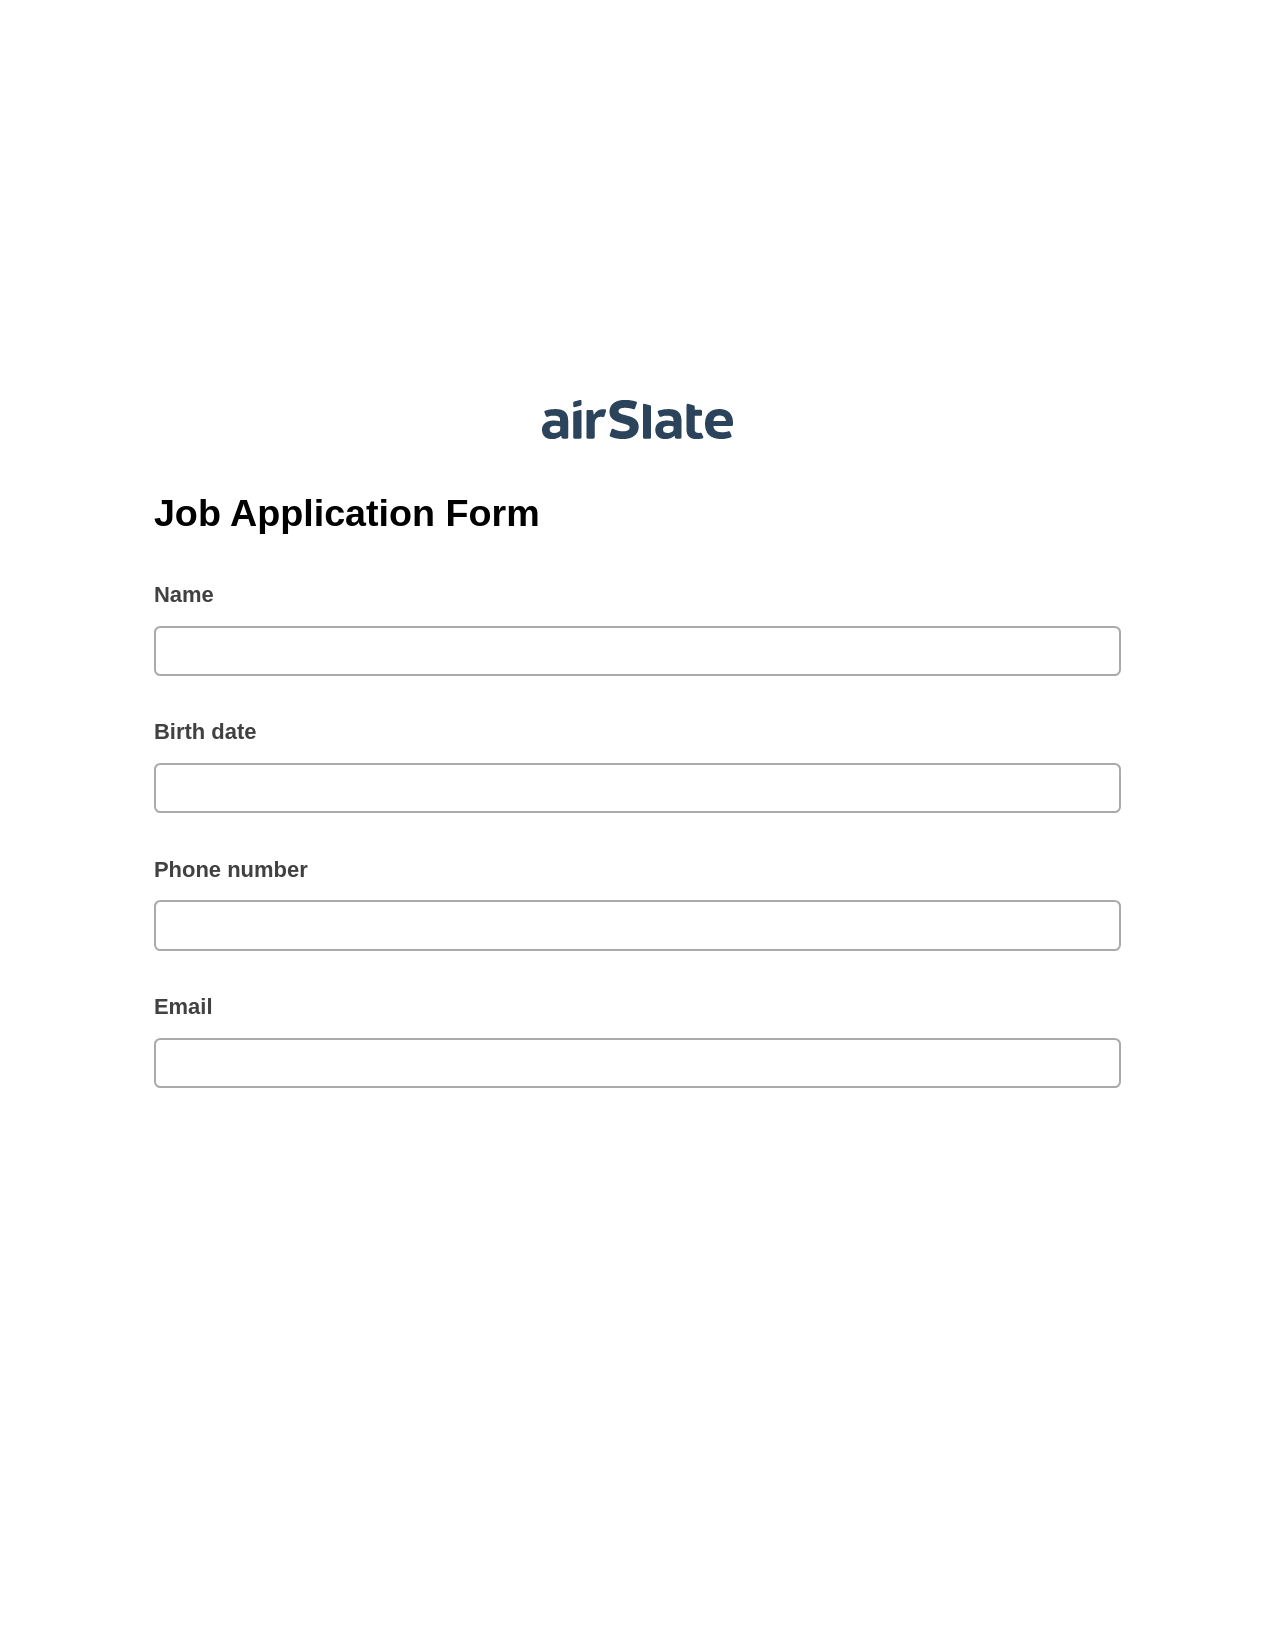 Job Application Form Pre-fill from Google Sheet Dropdown Options Bot, Pre-fill with Custom Data Bot, Export to NetSuite Record Bot